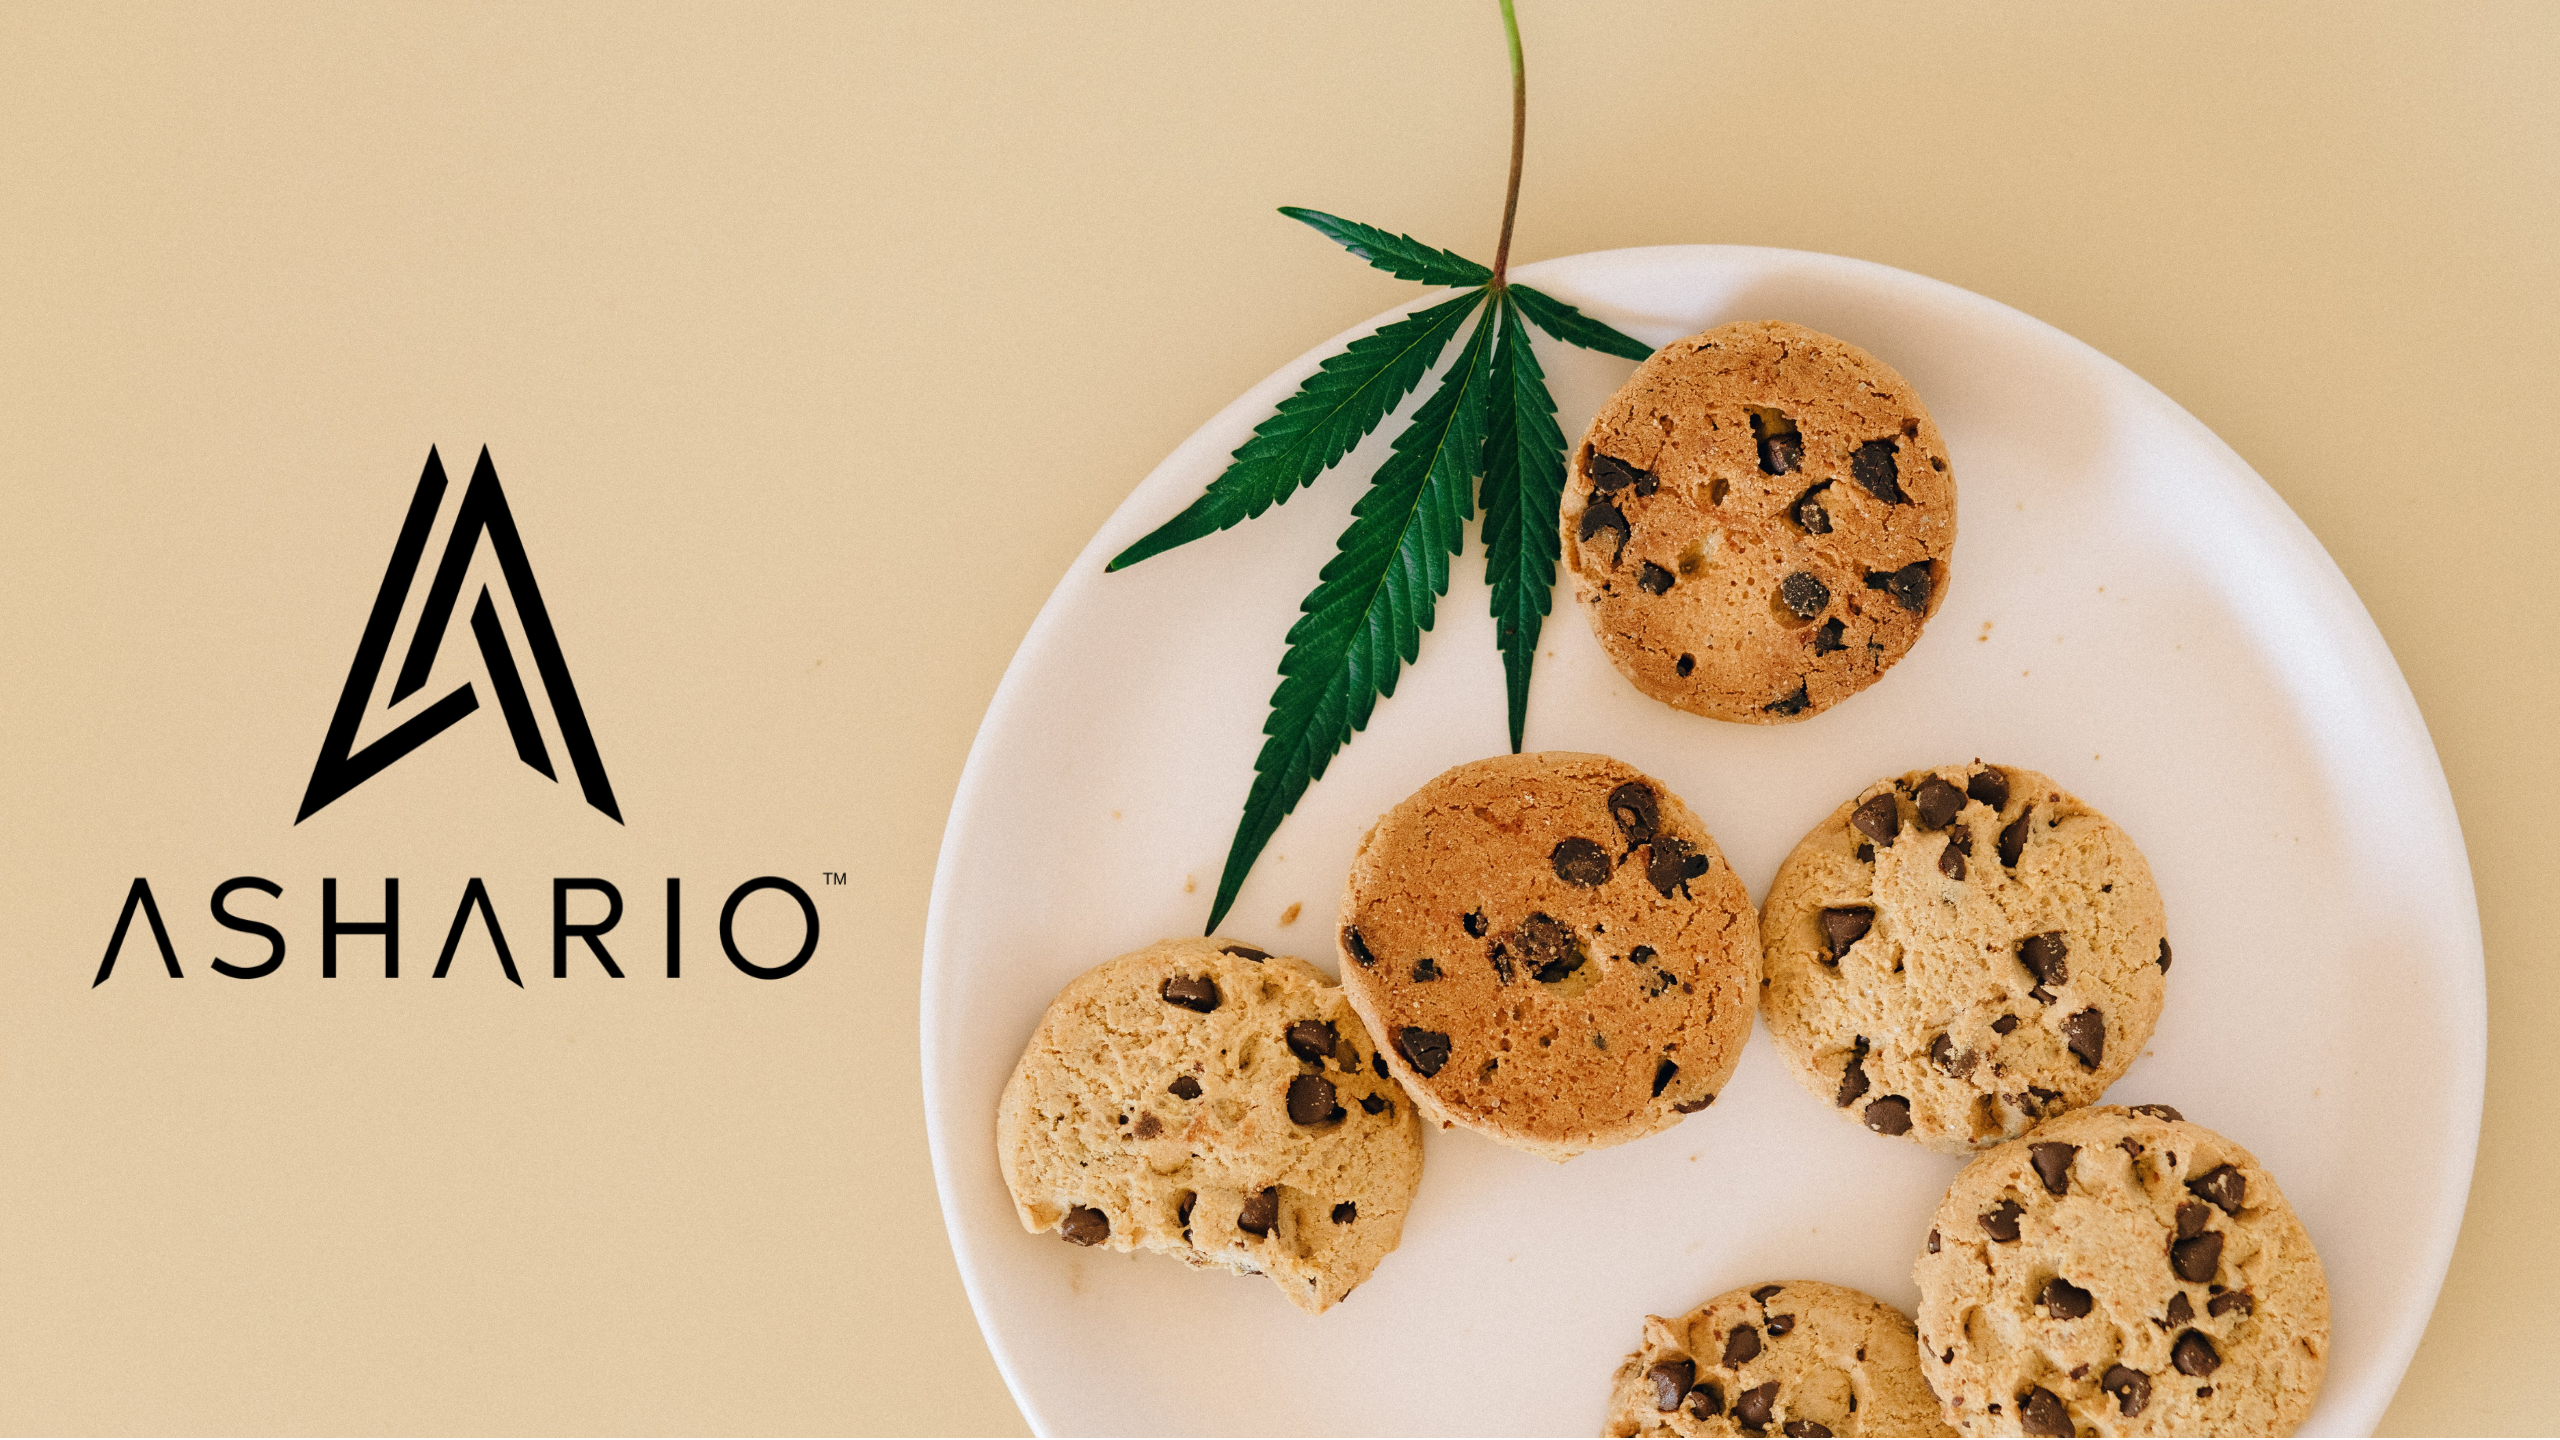  Best Cannabis Dispensary in North York